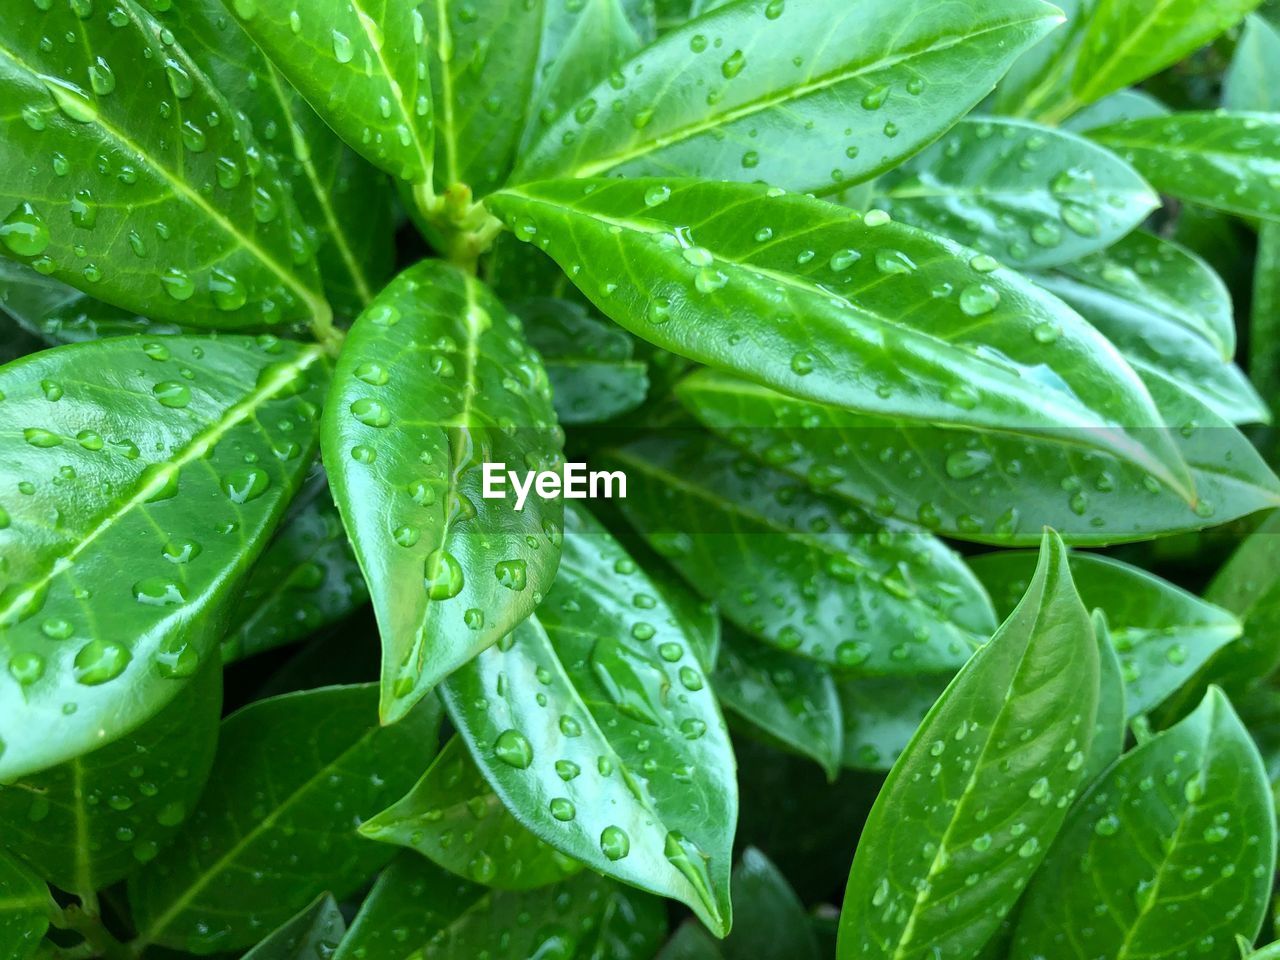 CLOSE-UP OF WET LEAVES